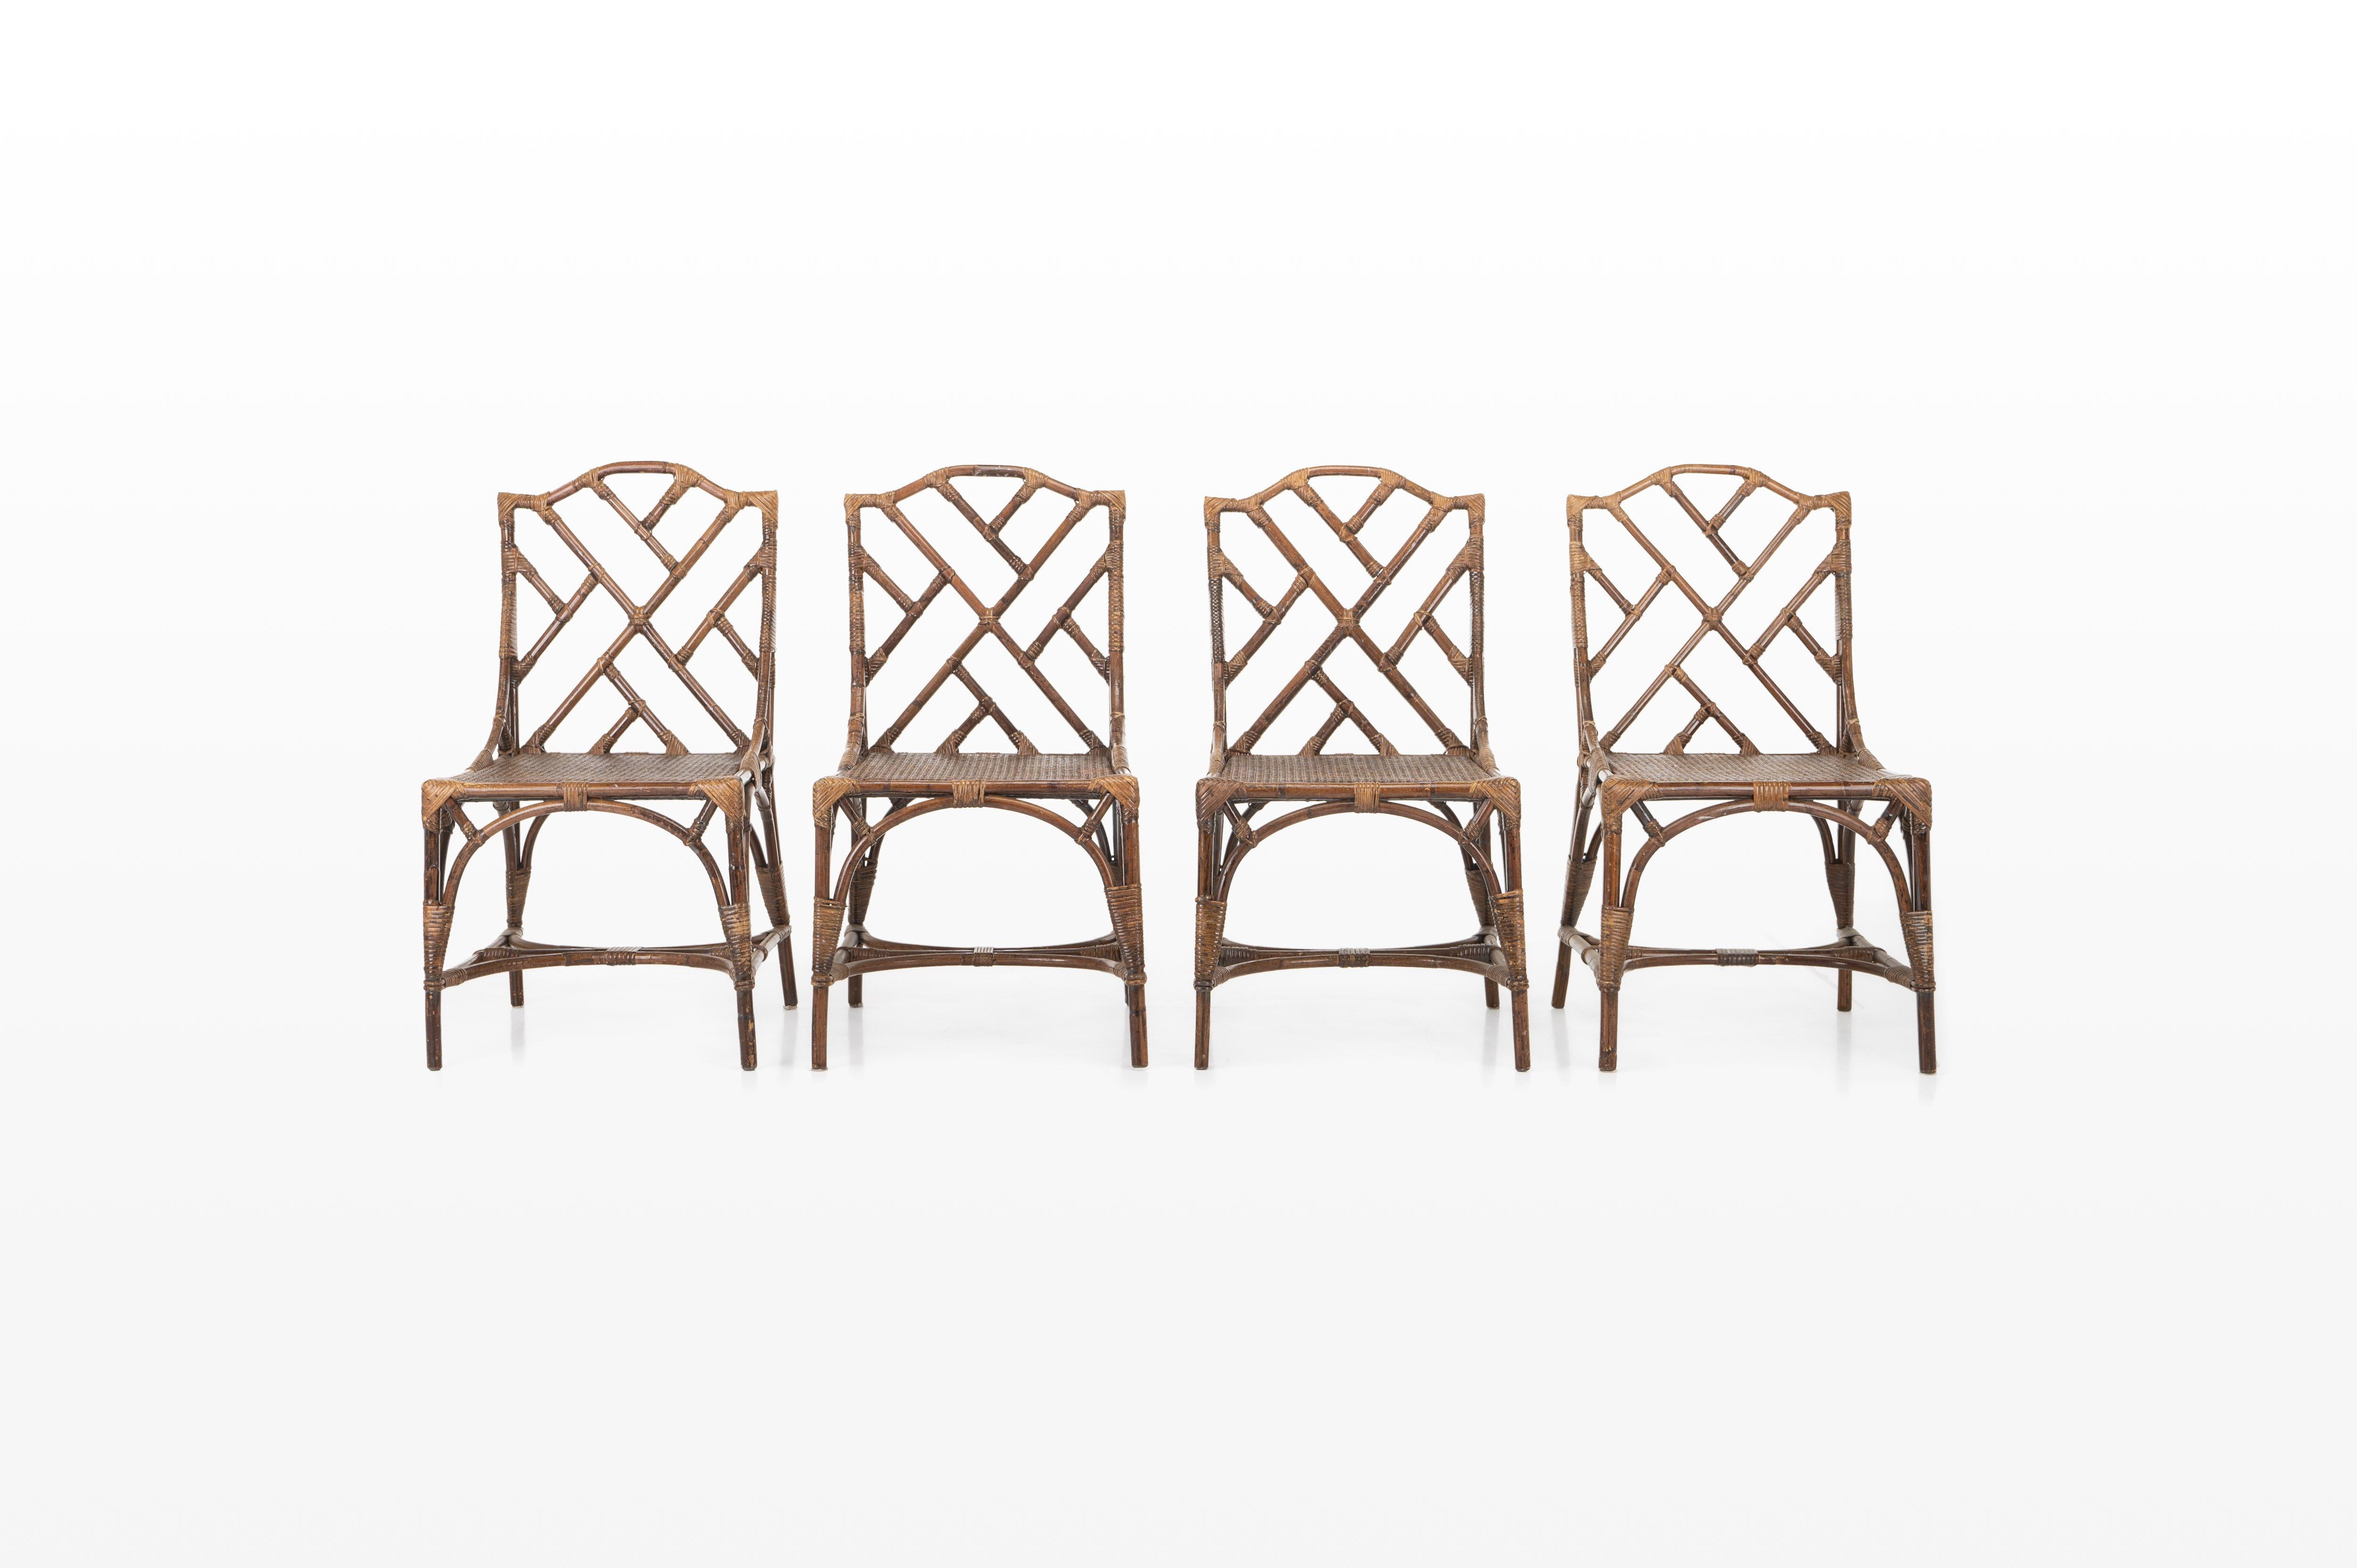 Beautiful bamboo dining room set in very good condition. The set includes a bamboo and rattan dining table and four dining room chairs with a webbing seat. The indicated price is for the complete set.

Dimensions Table:
W: 140 cm
D: 82 cm
H: 75